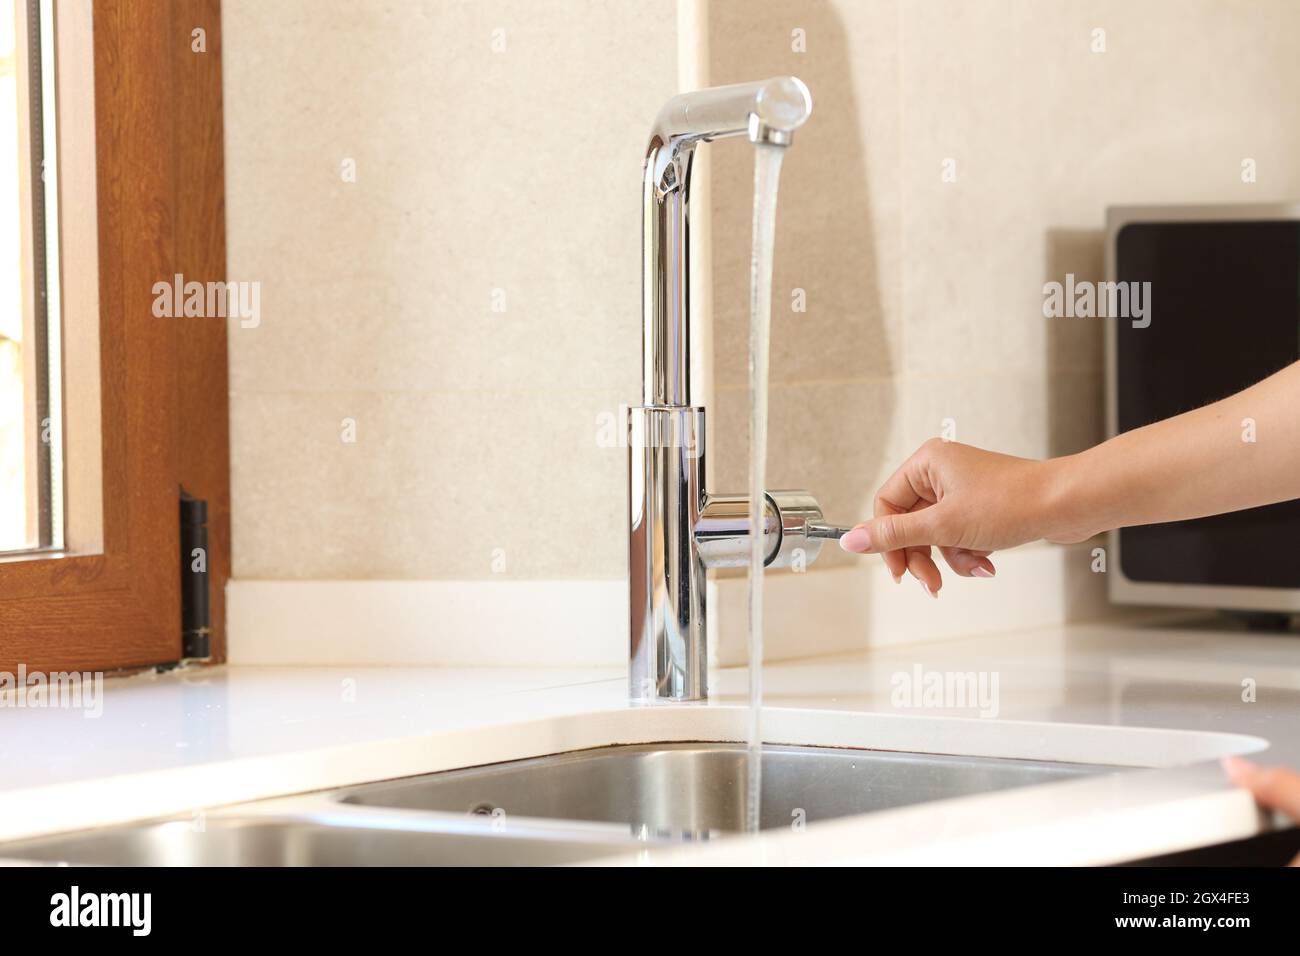 Close up of a woman hand opening kitchen faucet Stock Photo